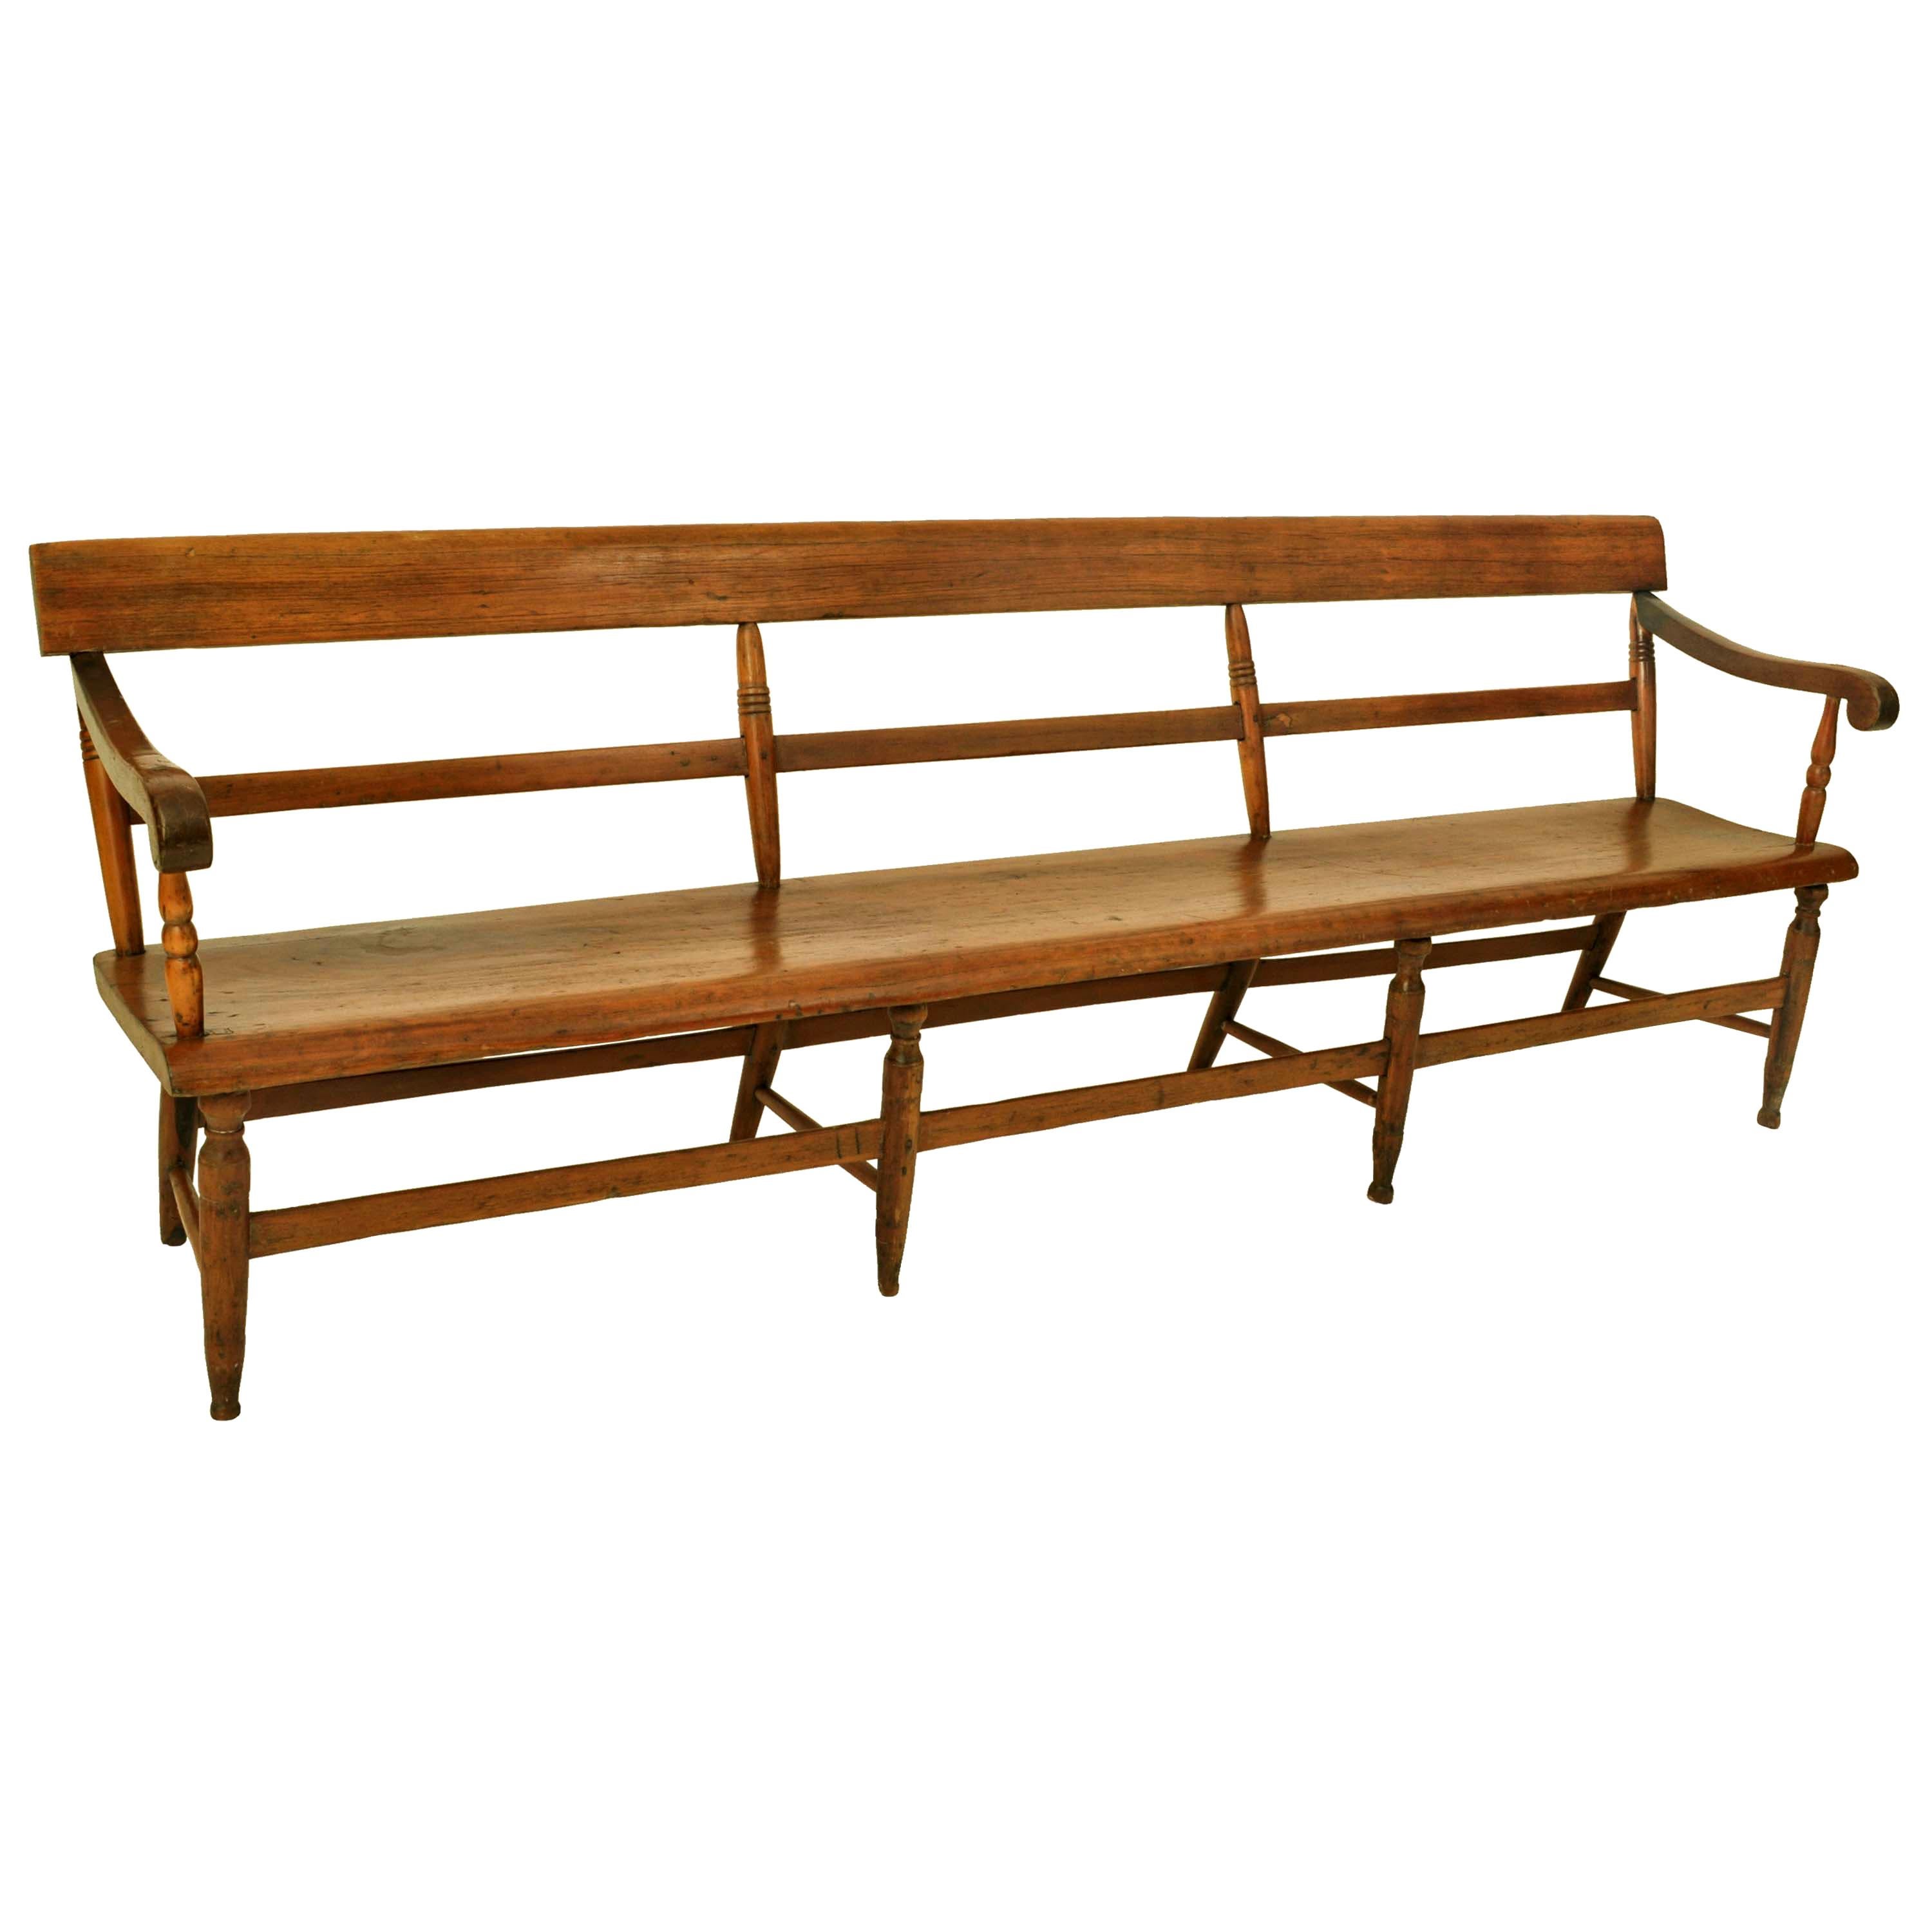 A good antique American Federal period cherry bench/settee, New England, Circa 1820.
The bench having simple turned spindles to the back and a planked backrest, the bench having scrolled arms and a shaped single plank seat. The bench is raised on